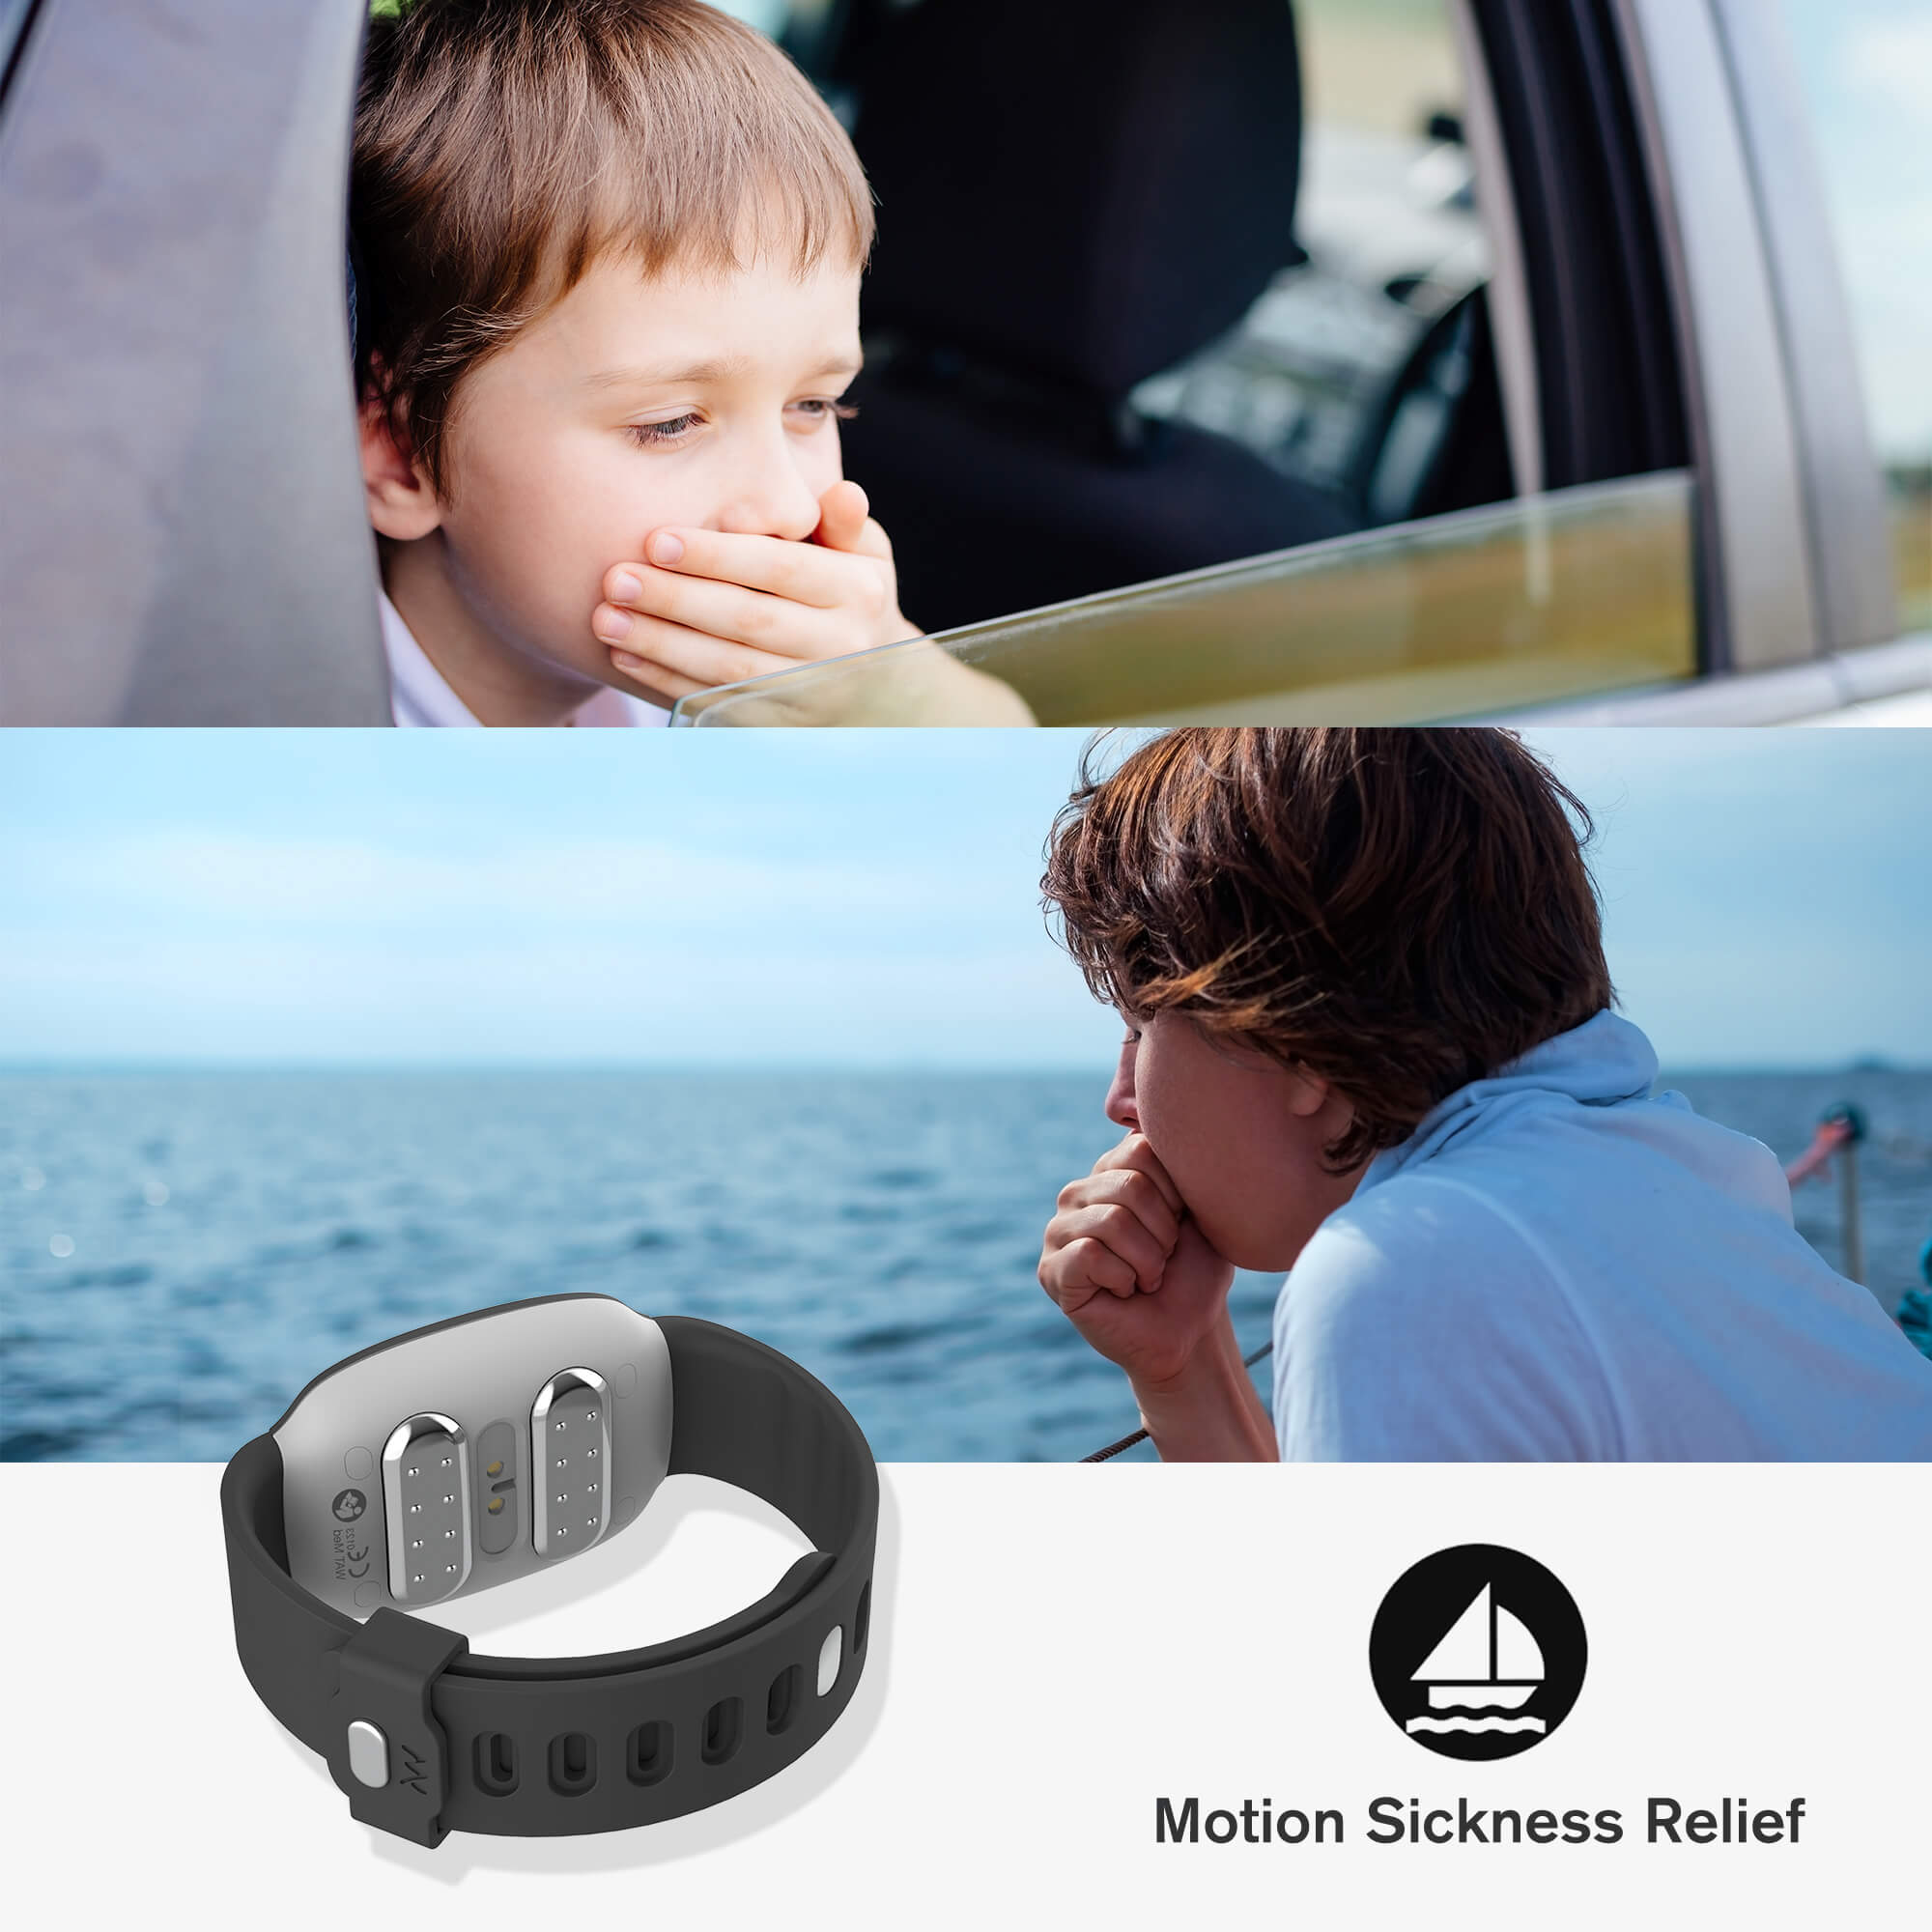 Travel Sickness Bands,2 Pairs Motion Sickness Wristbands for Kids and  Adults-Motion Sickness Bands-Anti Nausea Wristbands-Nausea Bands for  Morning Car Travel Sea Sickness : Amazon.co.uk: Health & Personal Care